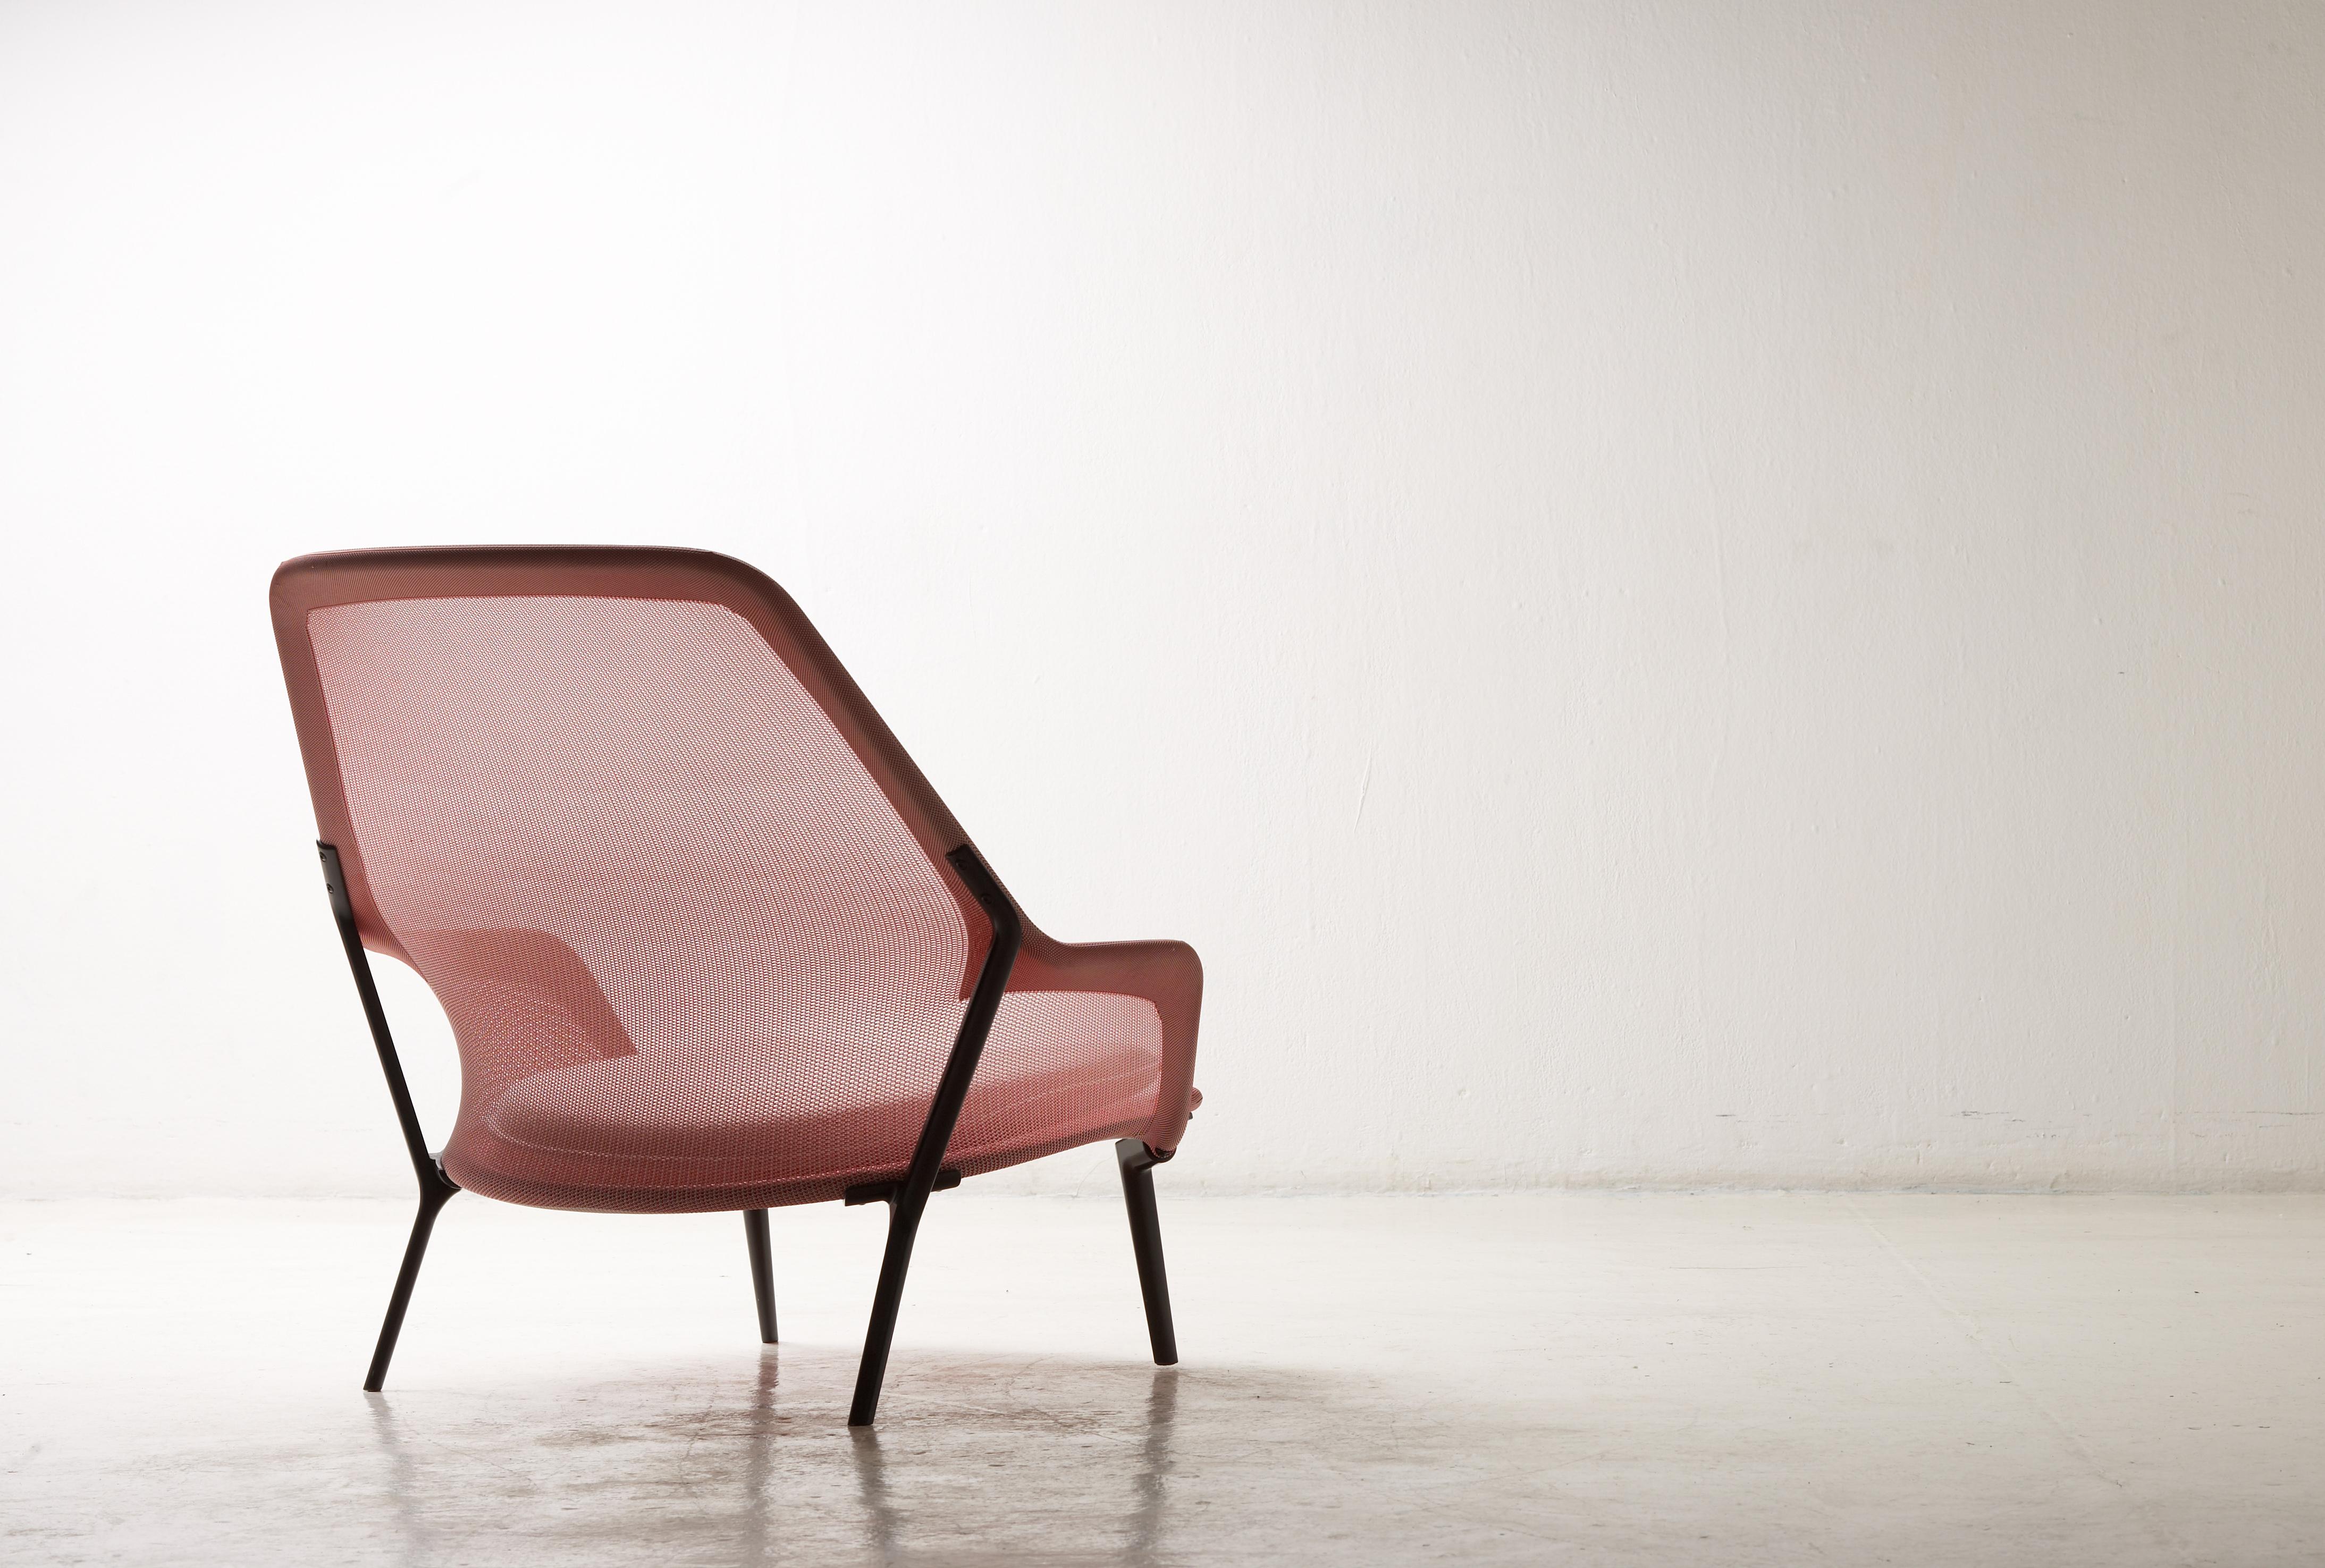 Vitra Slow Chair in Red and Cream by Ronan & Erwan Bouroullec (Stahl) im Angebot